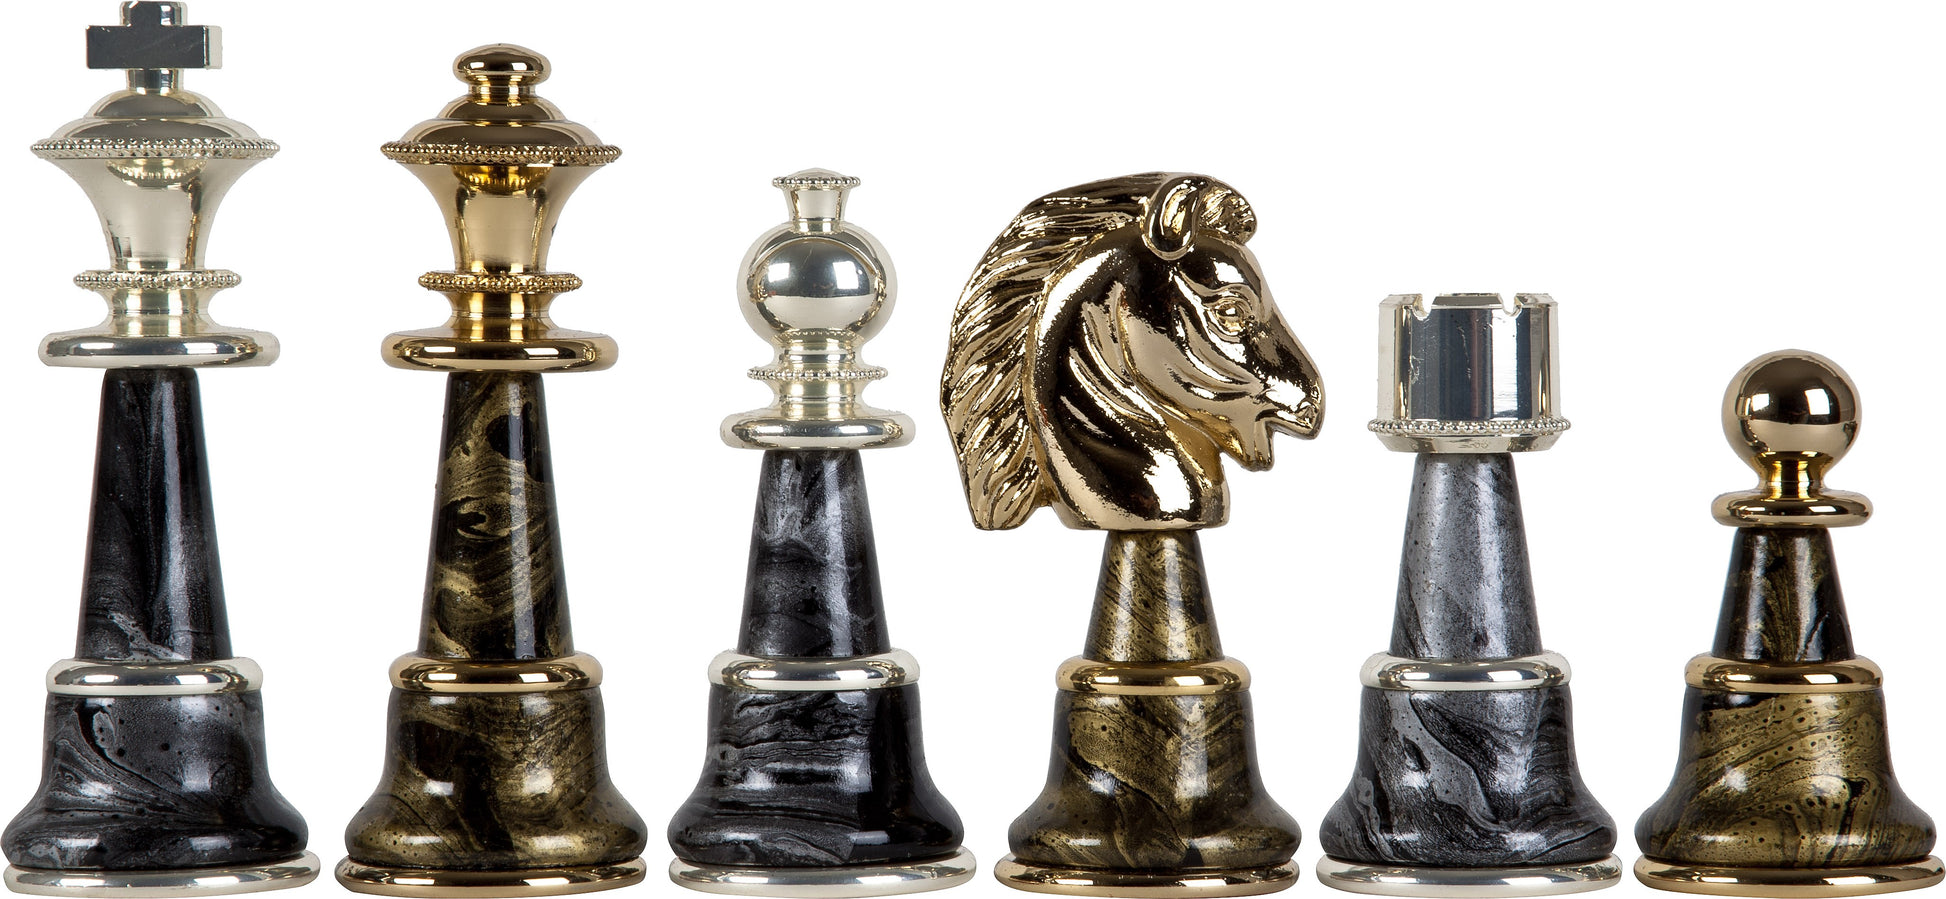 The Magnificent - Gold/Silver-Plated Brass Wood Chess Pieces